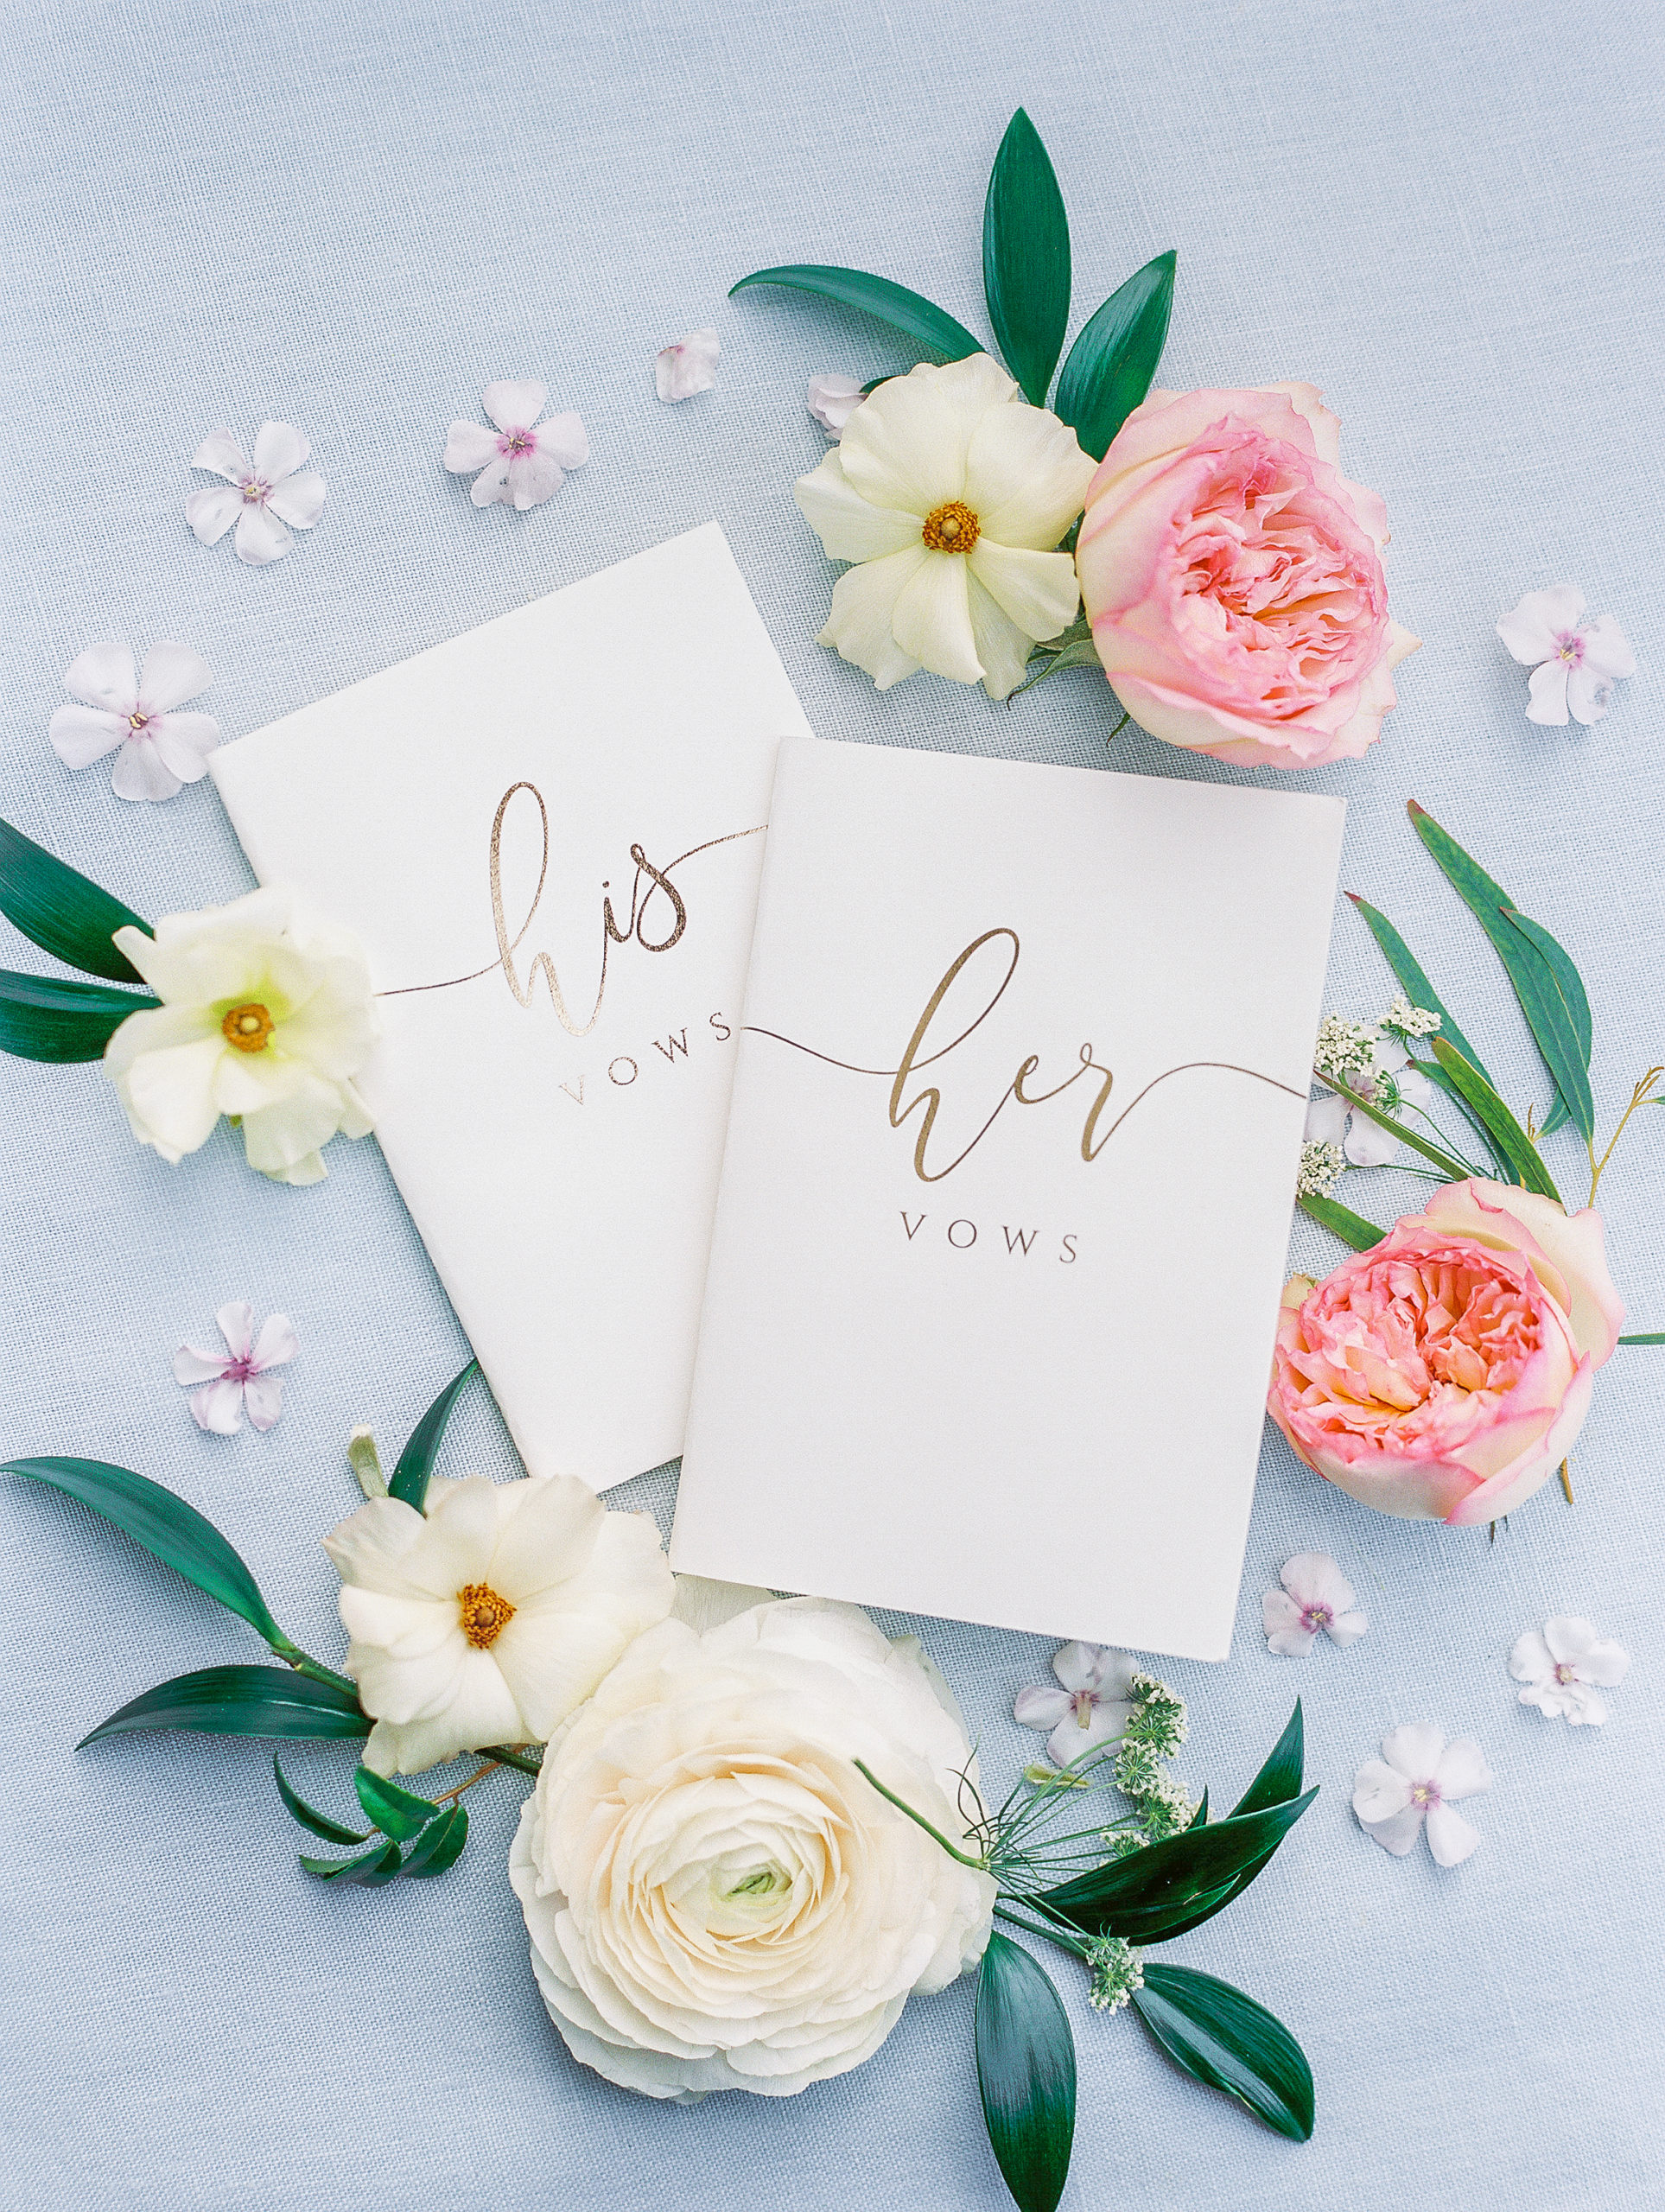 His and Her vows of gold calligraphy and white and pink flowers for New Hampshire Wedding Photography